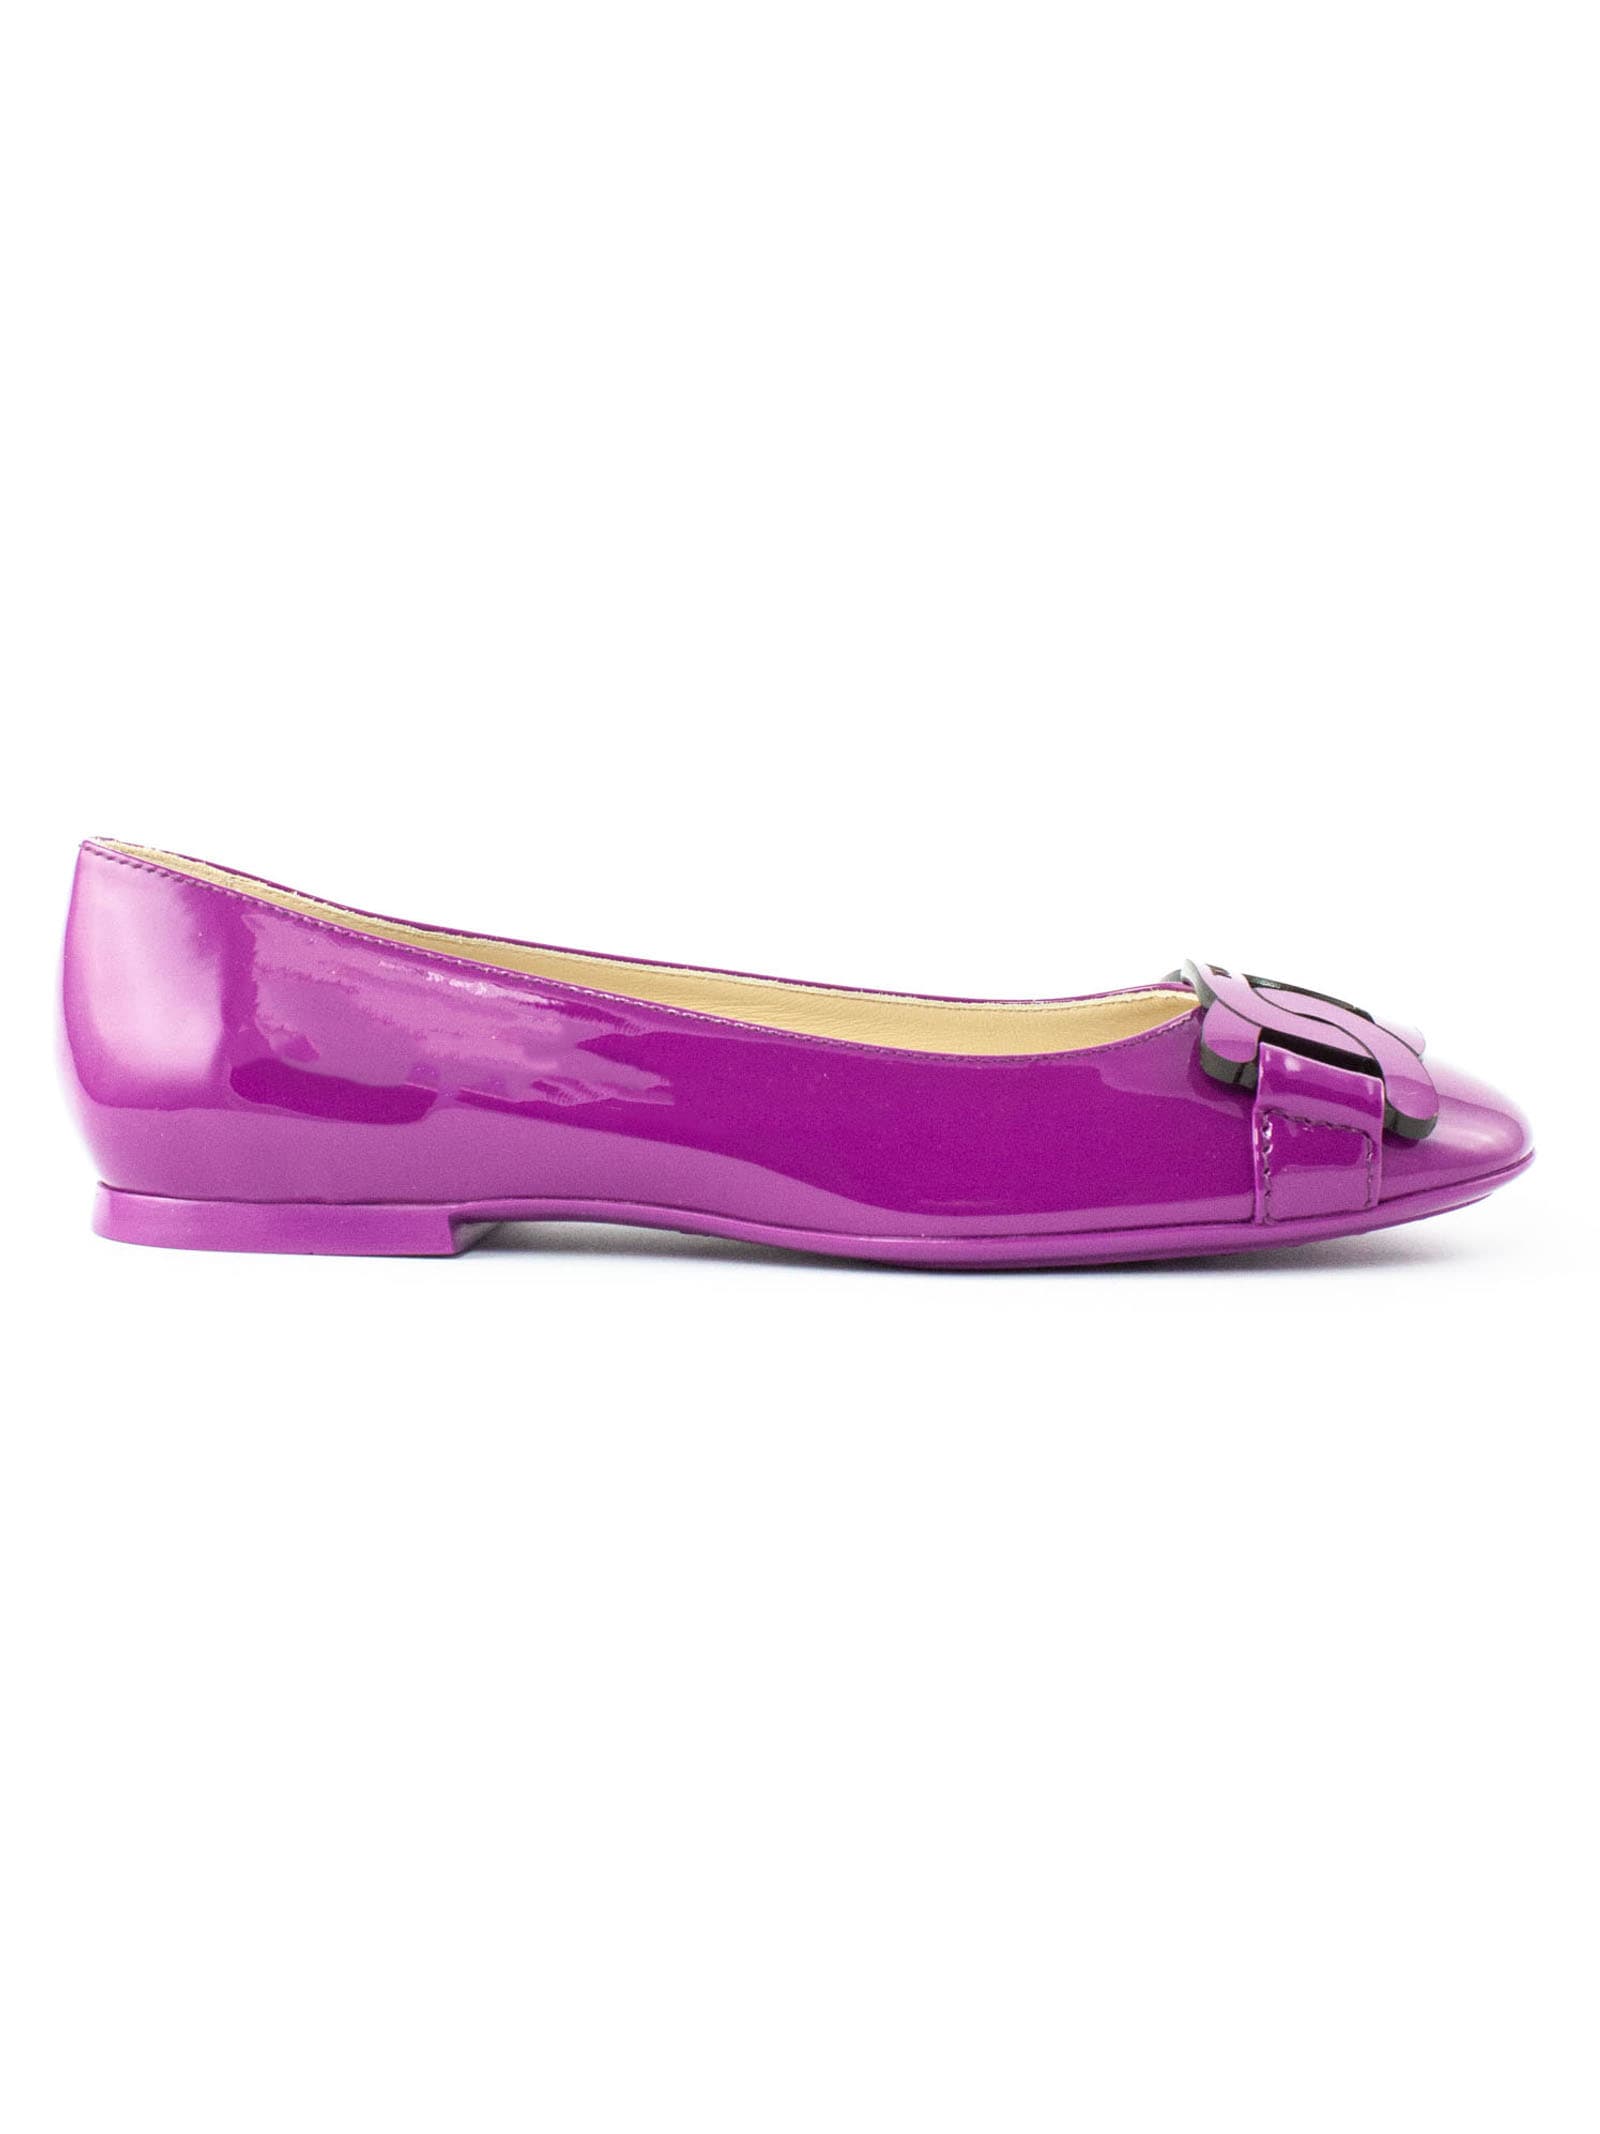 Buy Tods Ballerinas Fuchsia Patent Leather online, shop Tods shoes with free shipping